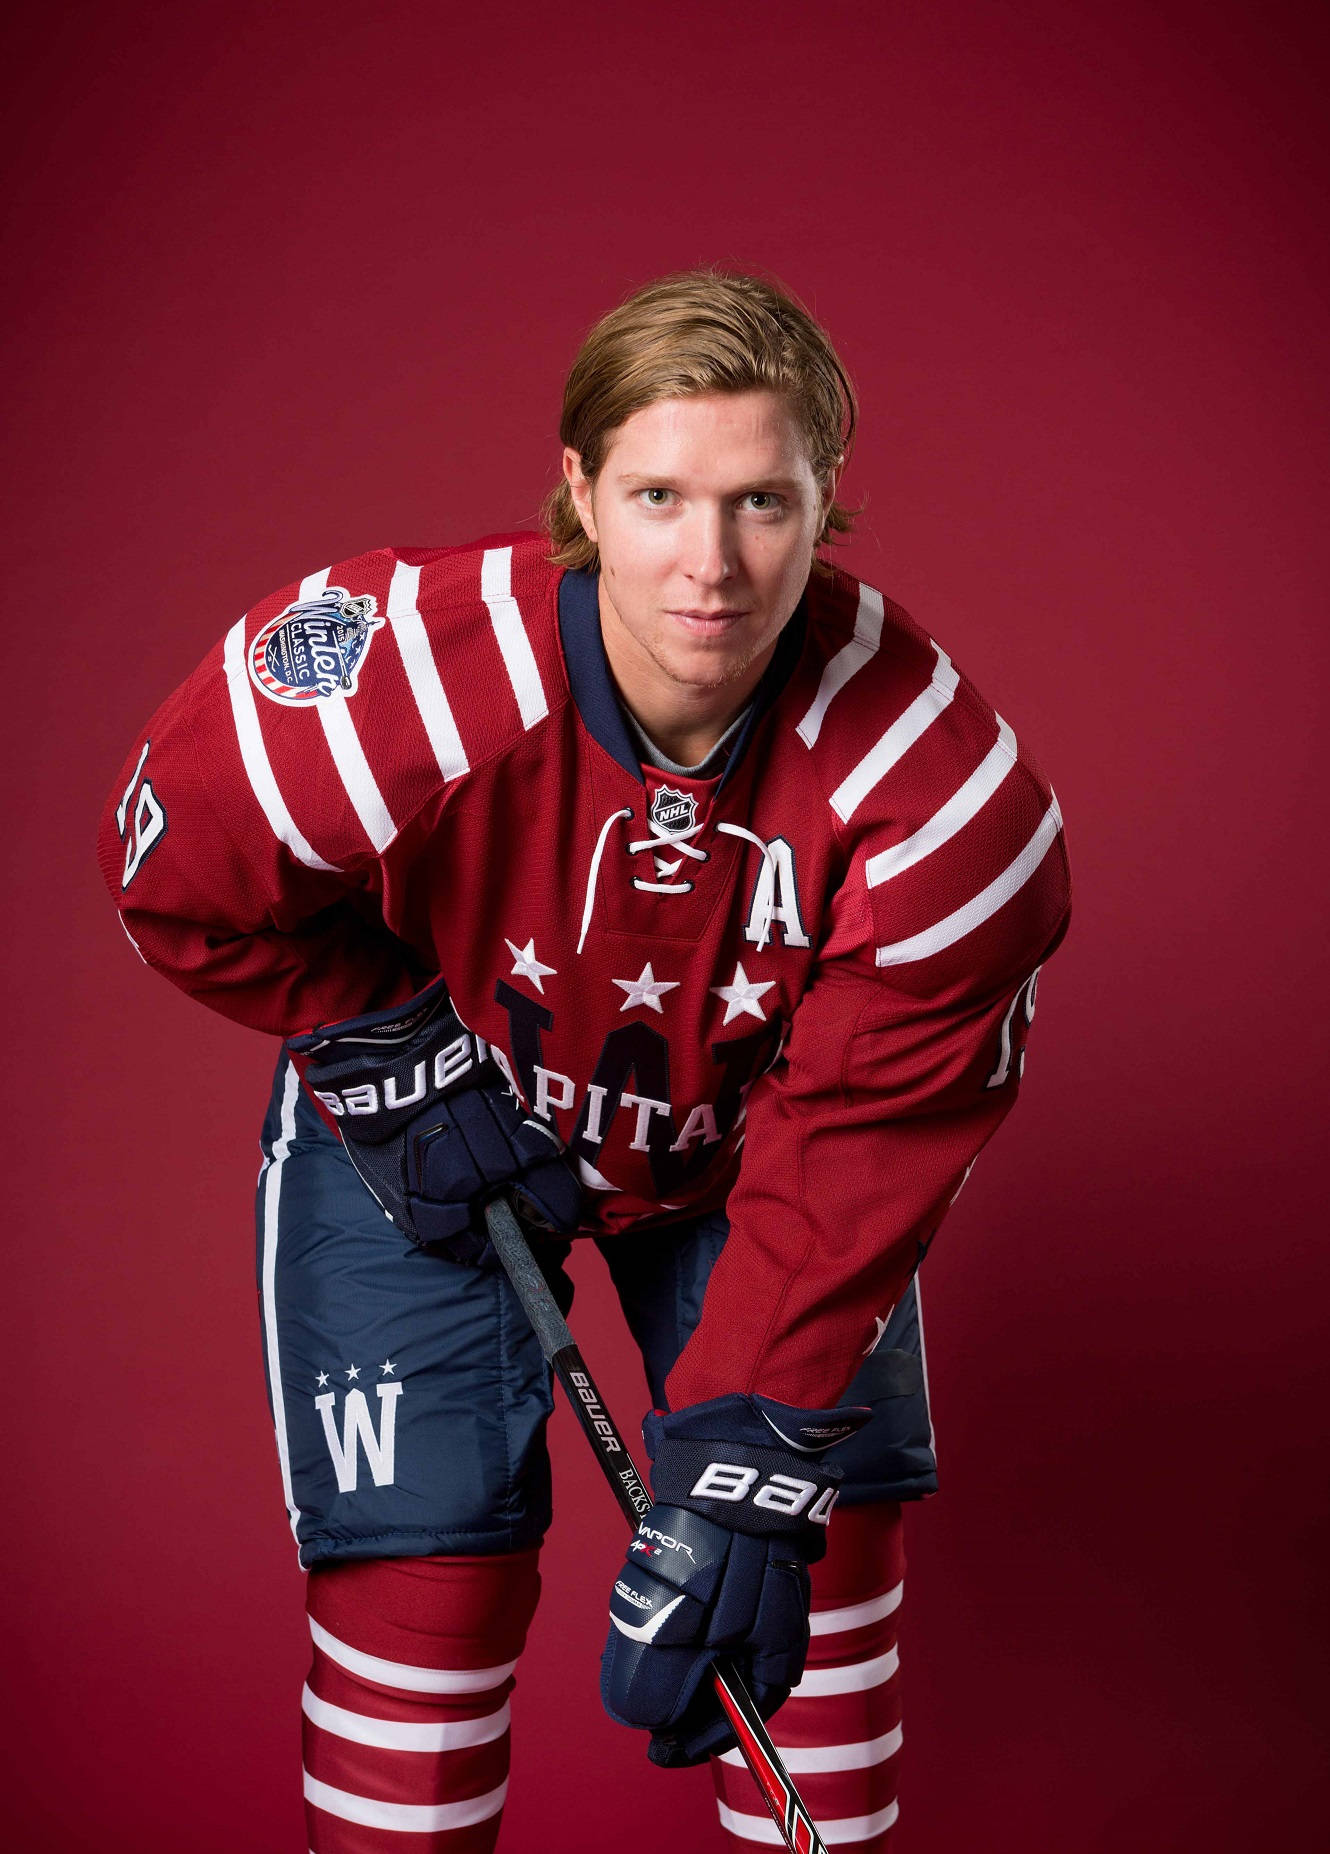 NHL Superstar Nicklas Backstrom in action for the Washington Capitals Wallpaper